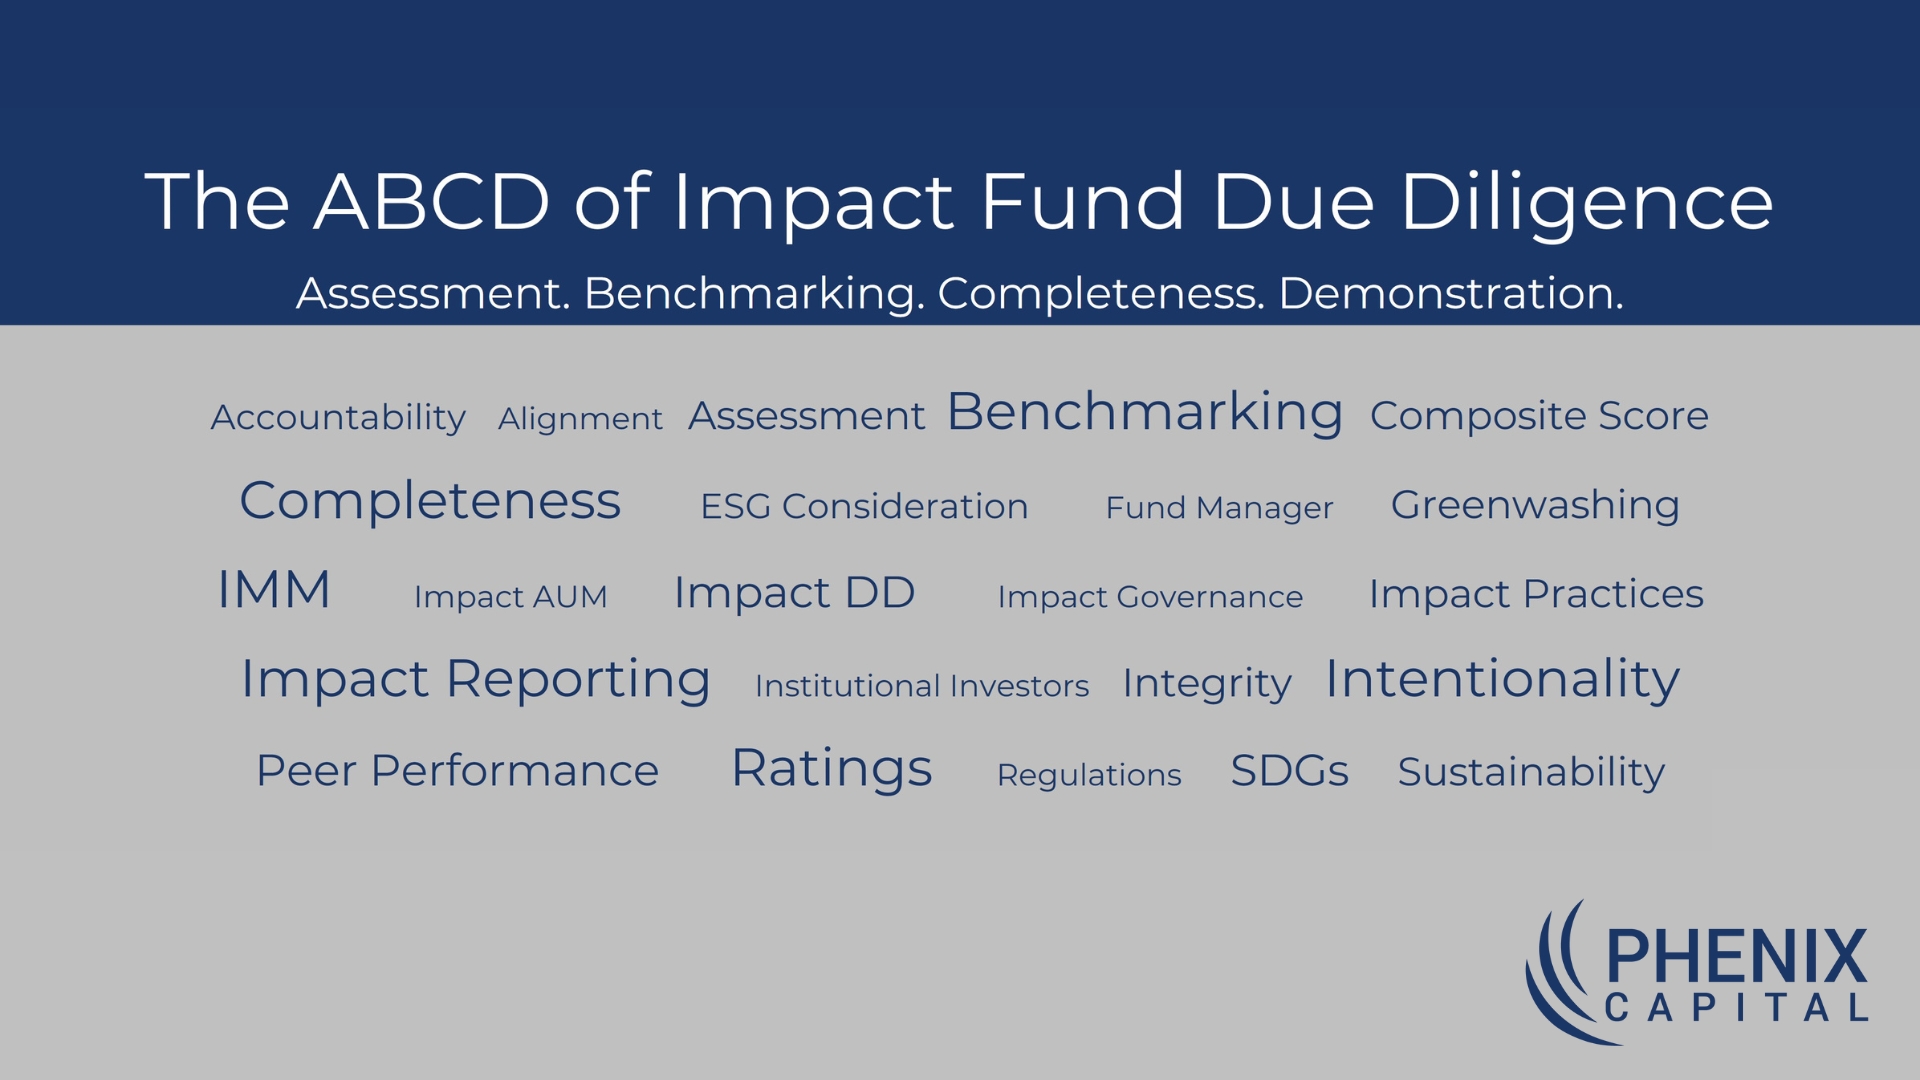 The ABCD of Impact Fund Due Diligence